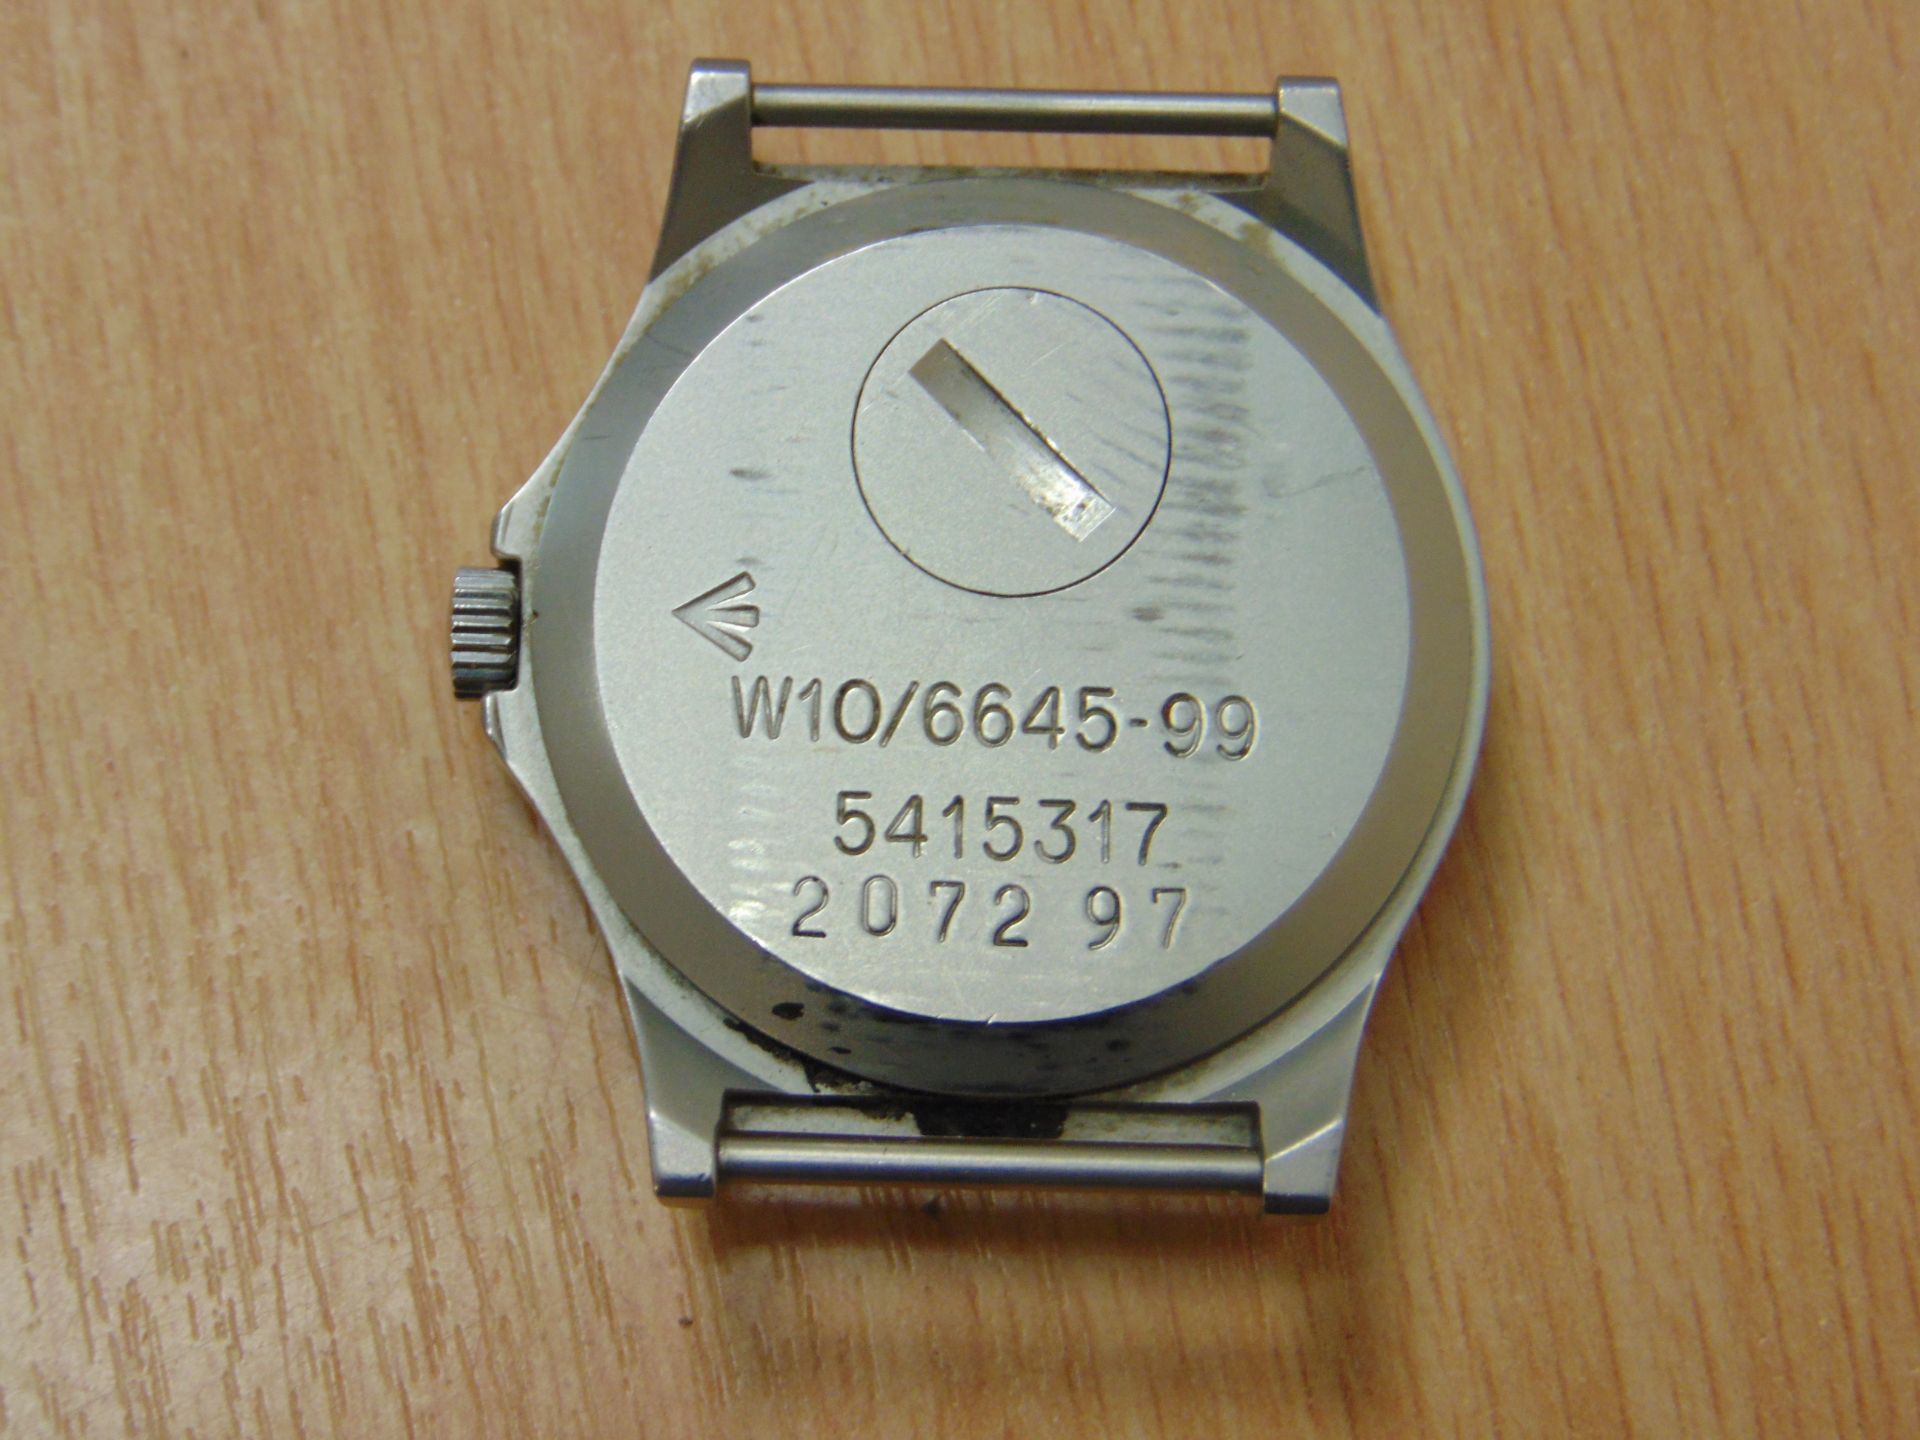 VERY NICE CWC W10 BRITISH ARMY SERVICE WATCH NATO MARKED DATED 1997 - Image 5 of 8